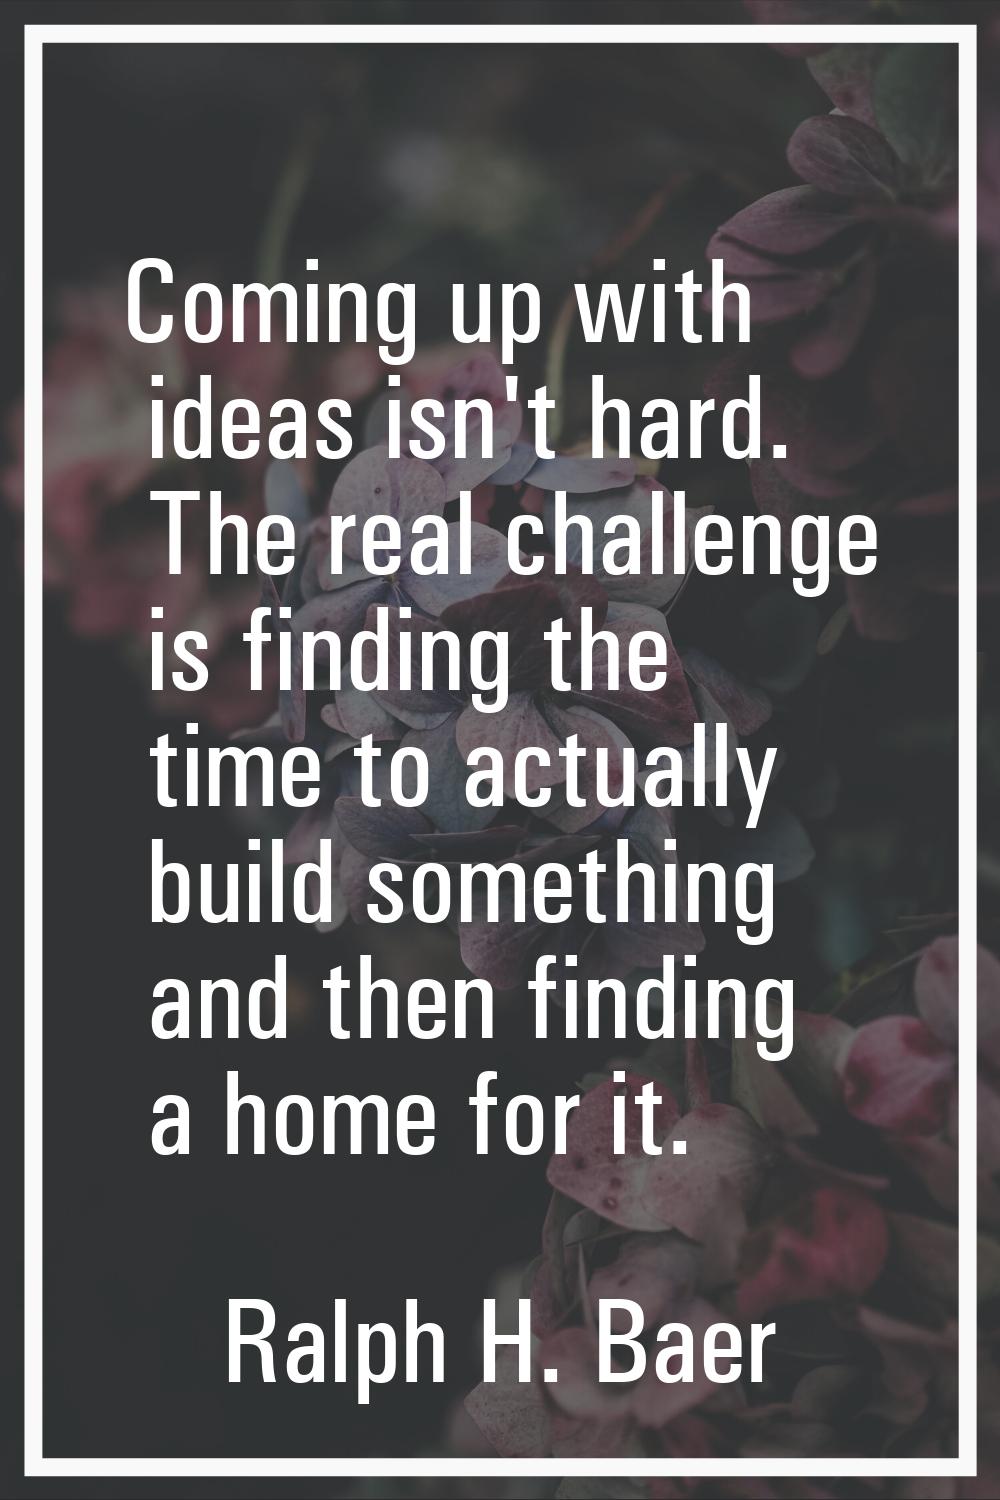 Coming up with ideas isn't hard. The real challenge is finding the time to actually build something